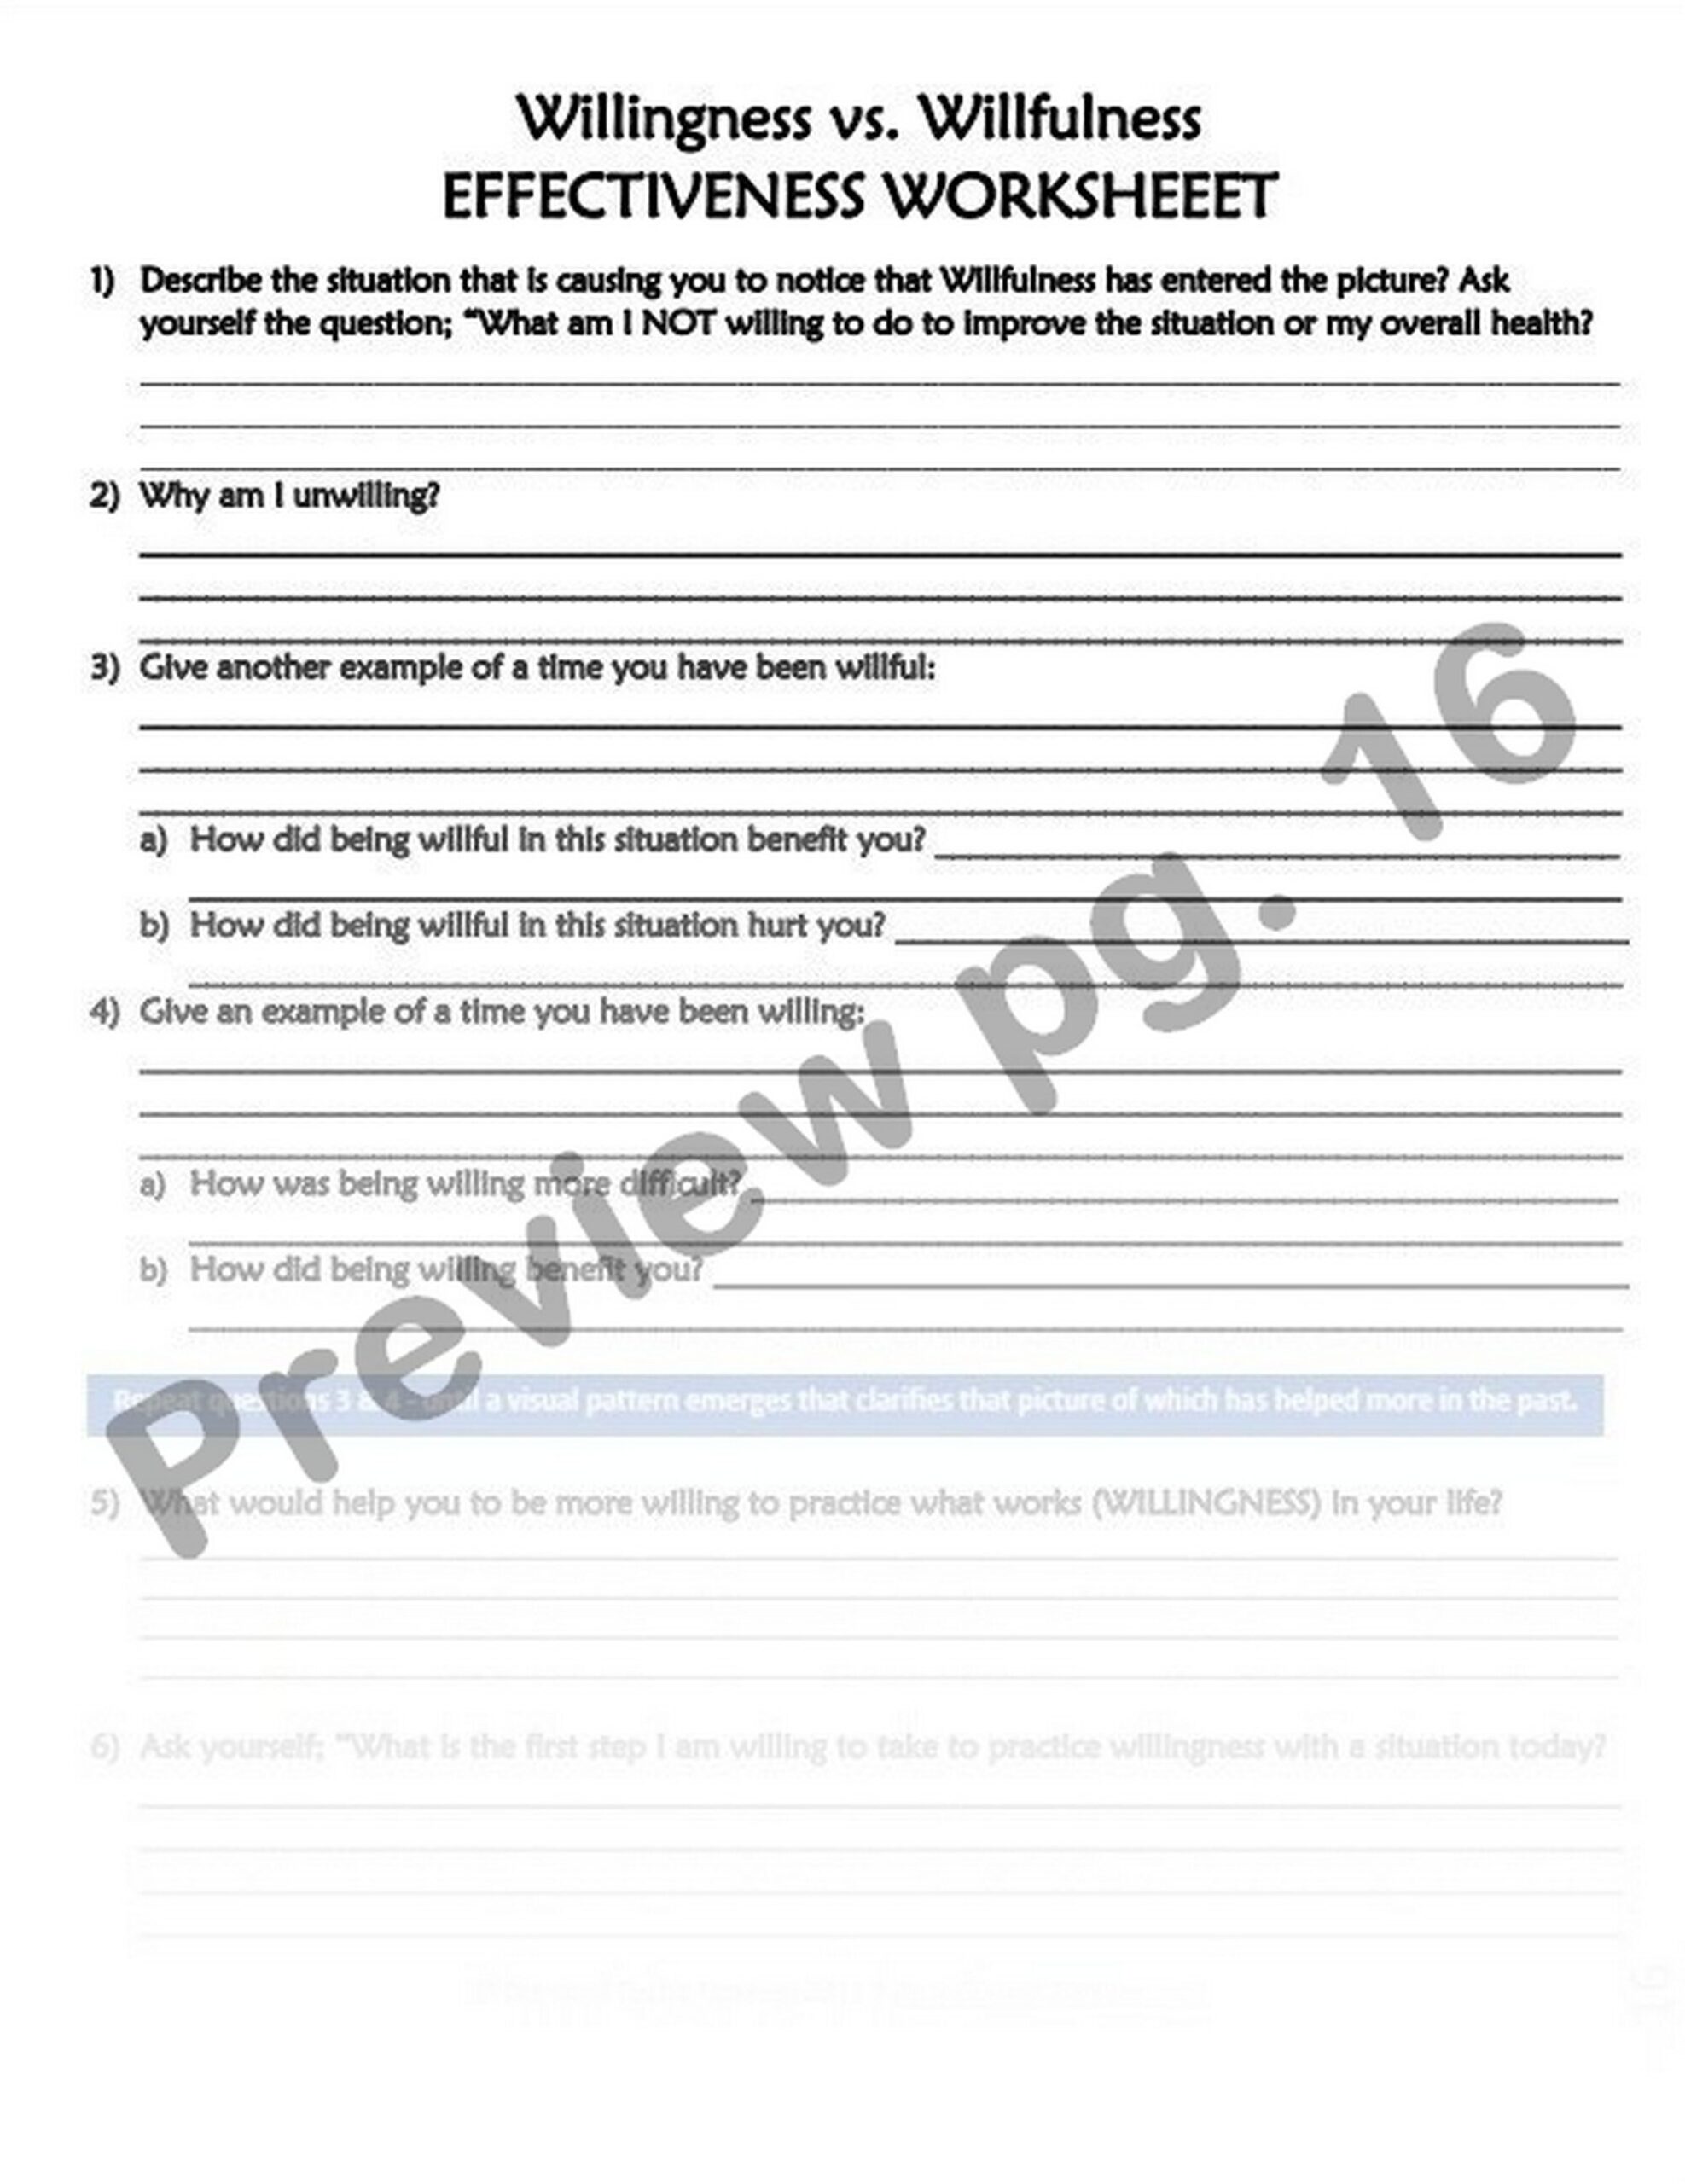 DBT LESSON 2 8 Willingness Vs Willfulness Worksheets And Handouts DBT Peer Guided Lessons Etsy